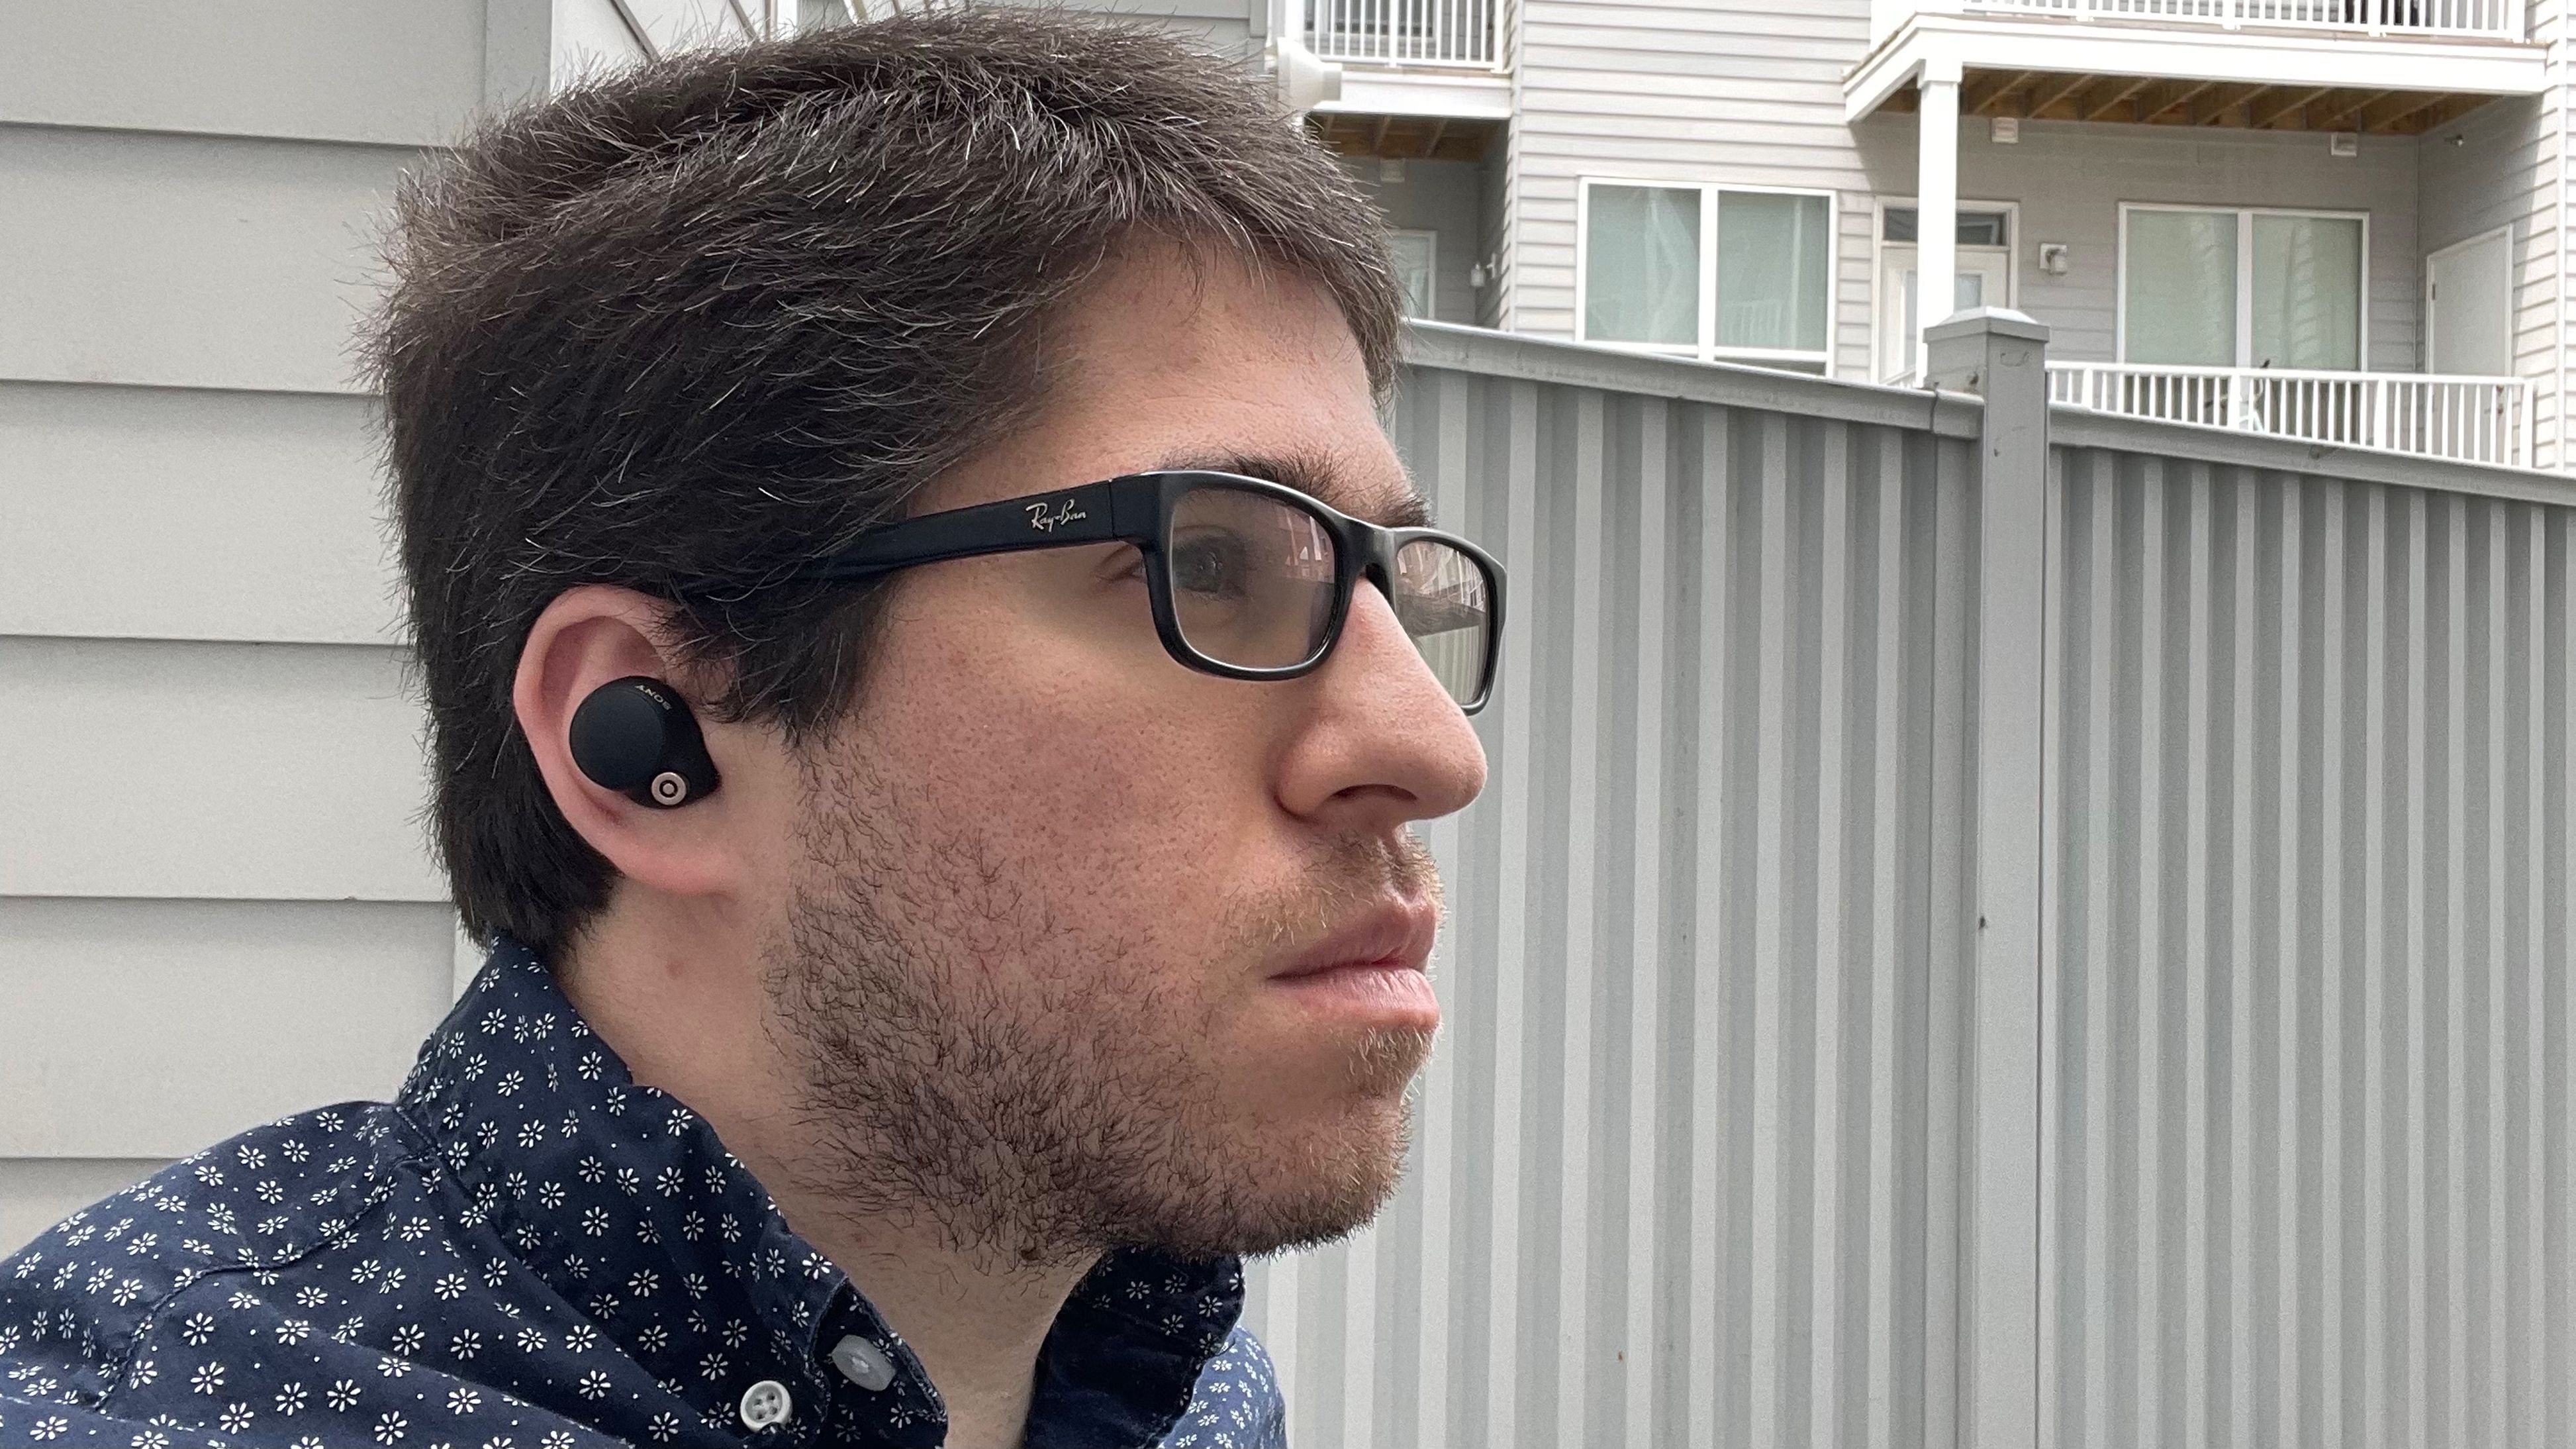 Sony WF-1000XM4 Review 1 Year Later : The Earbuds to Beat!? 